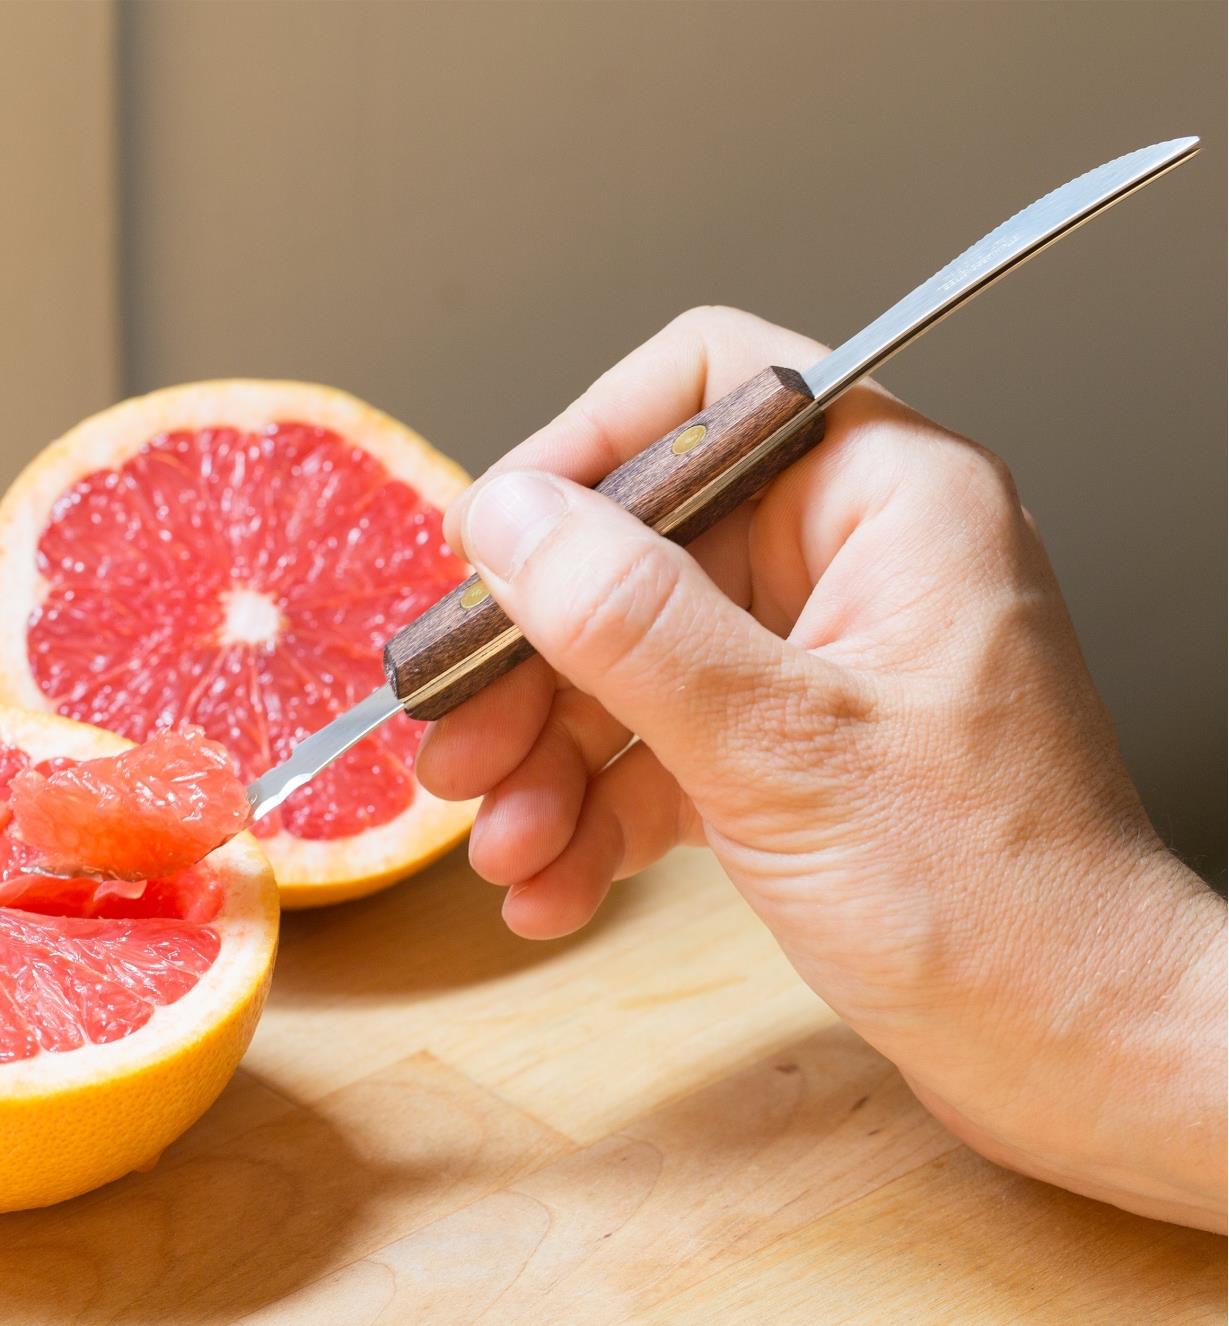 Lifting out a grapefruit segment with the Grapefruit Knife